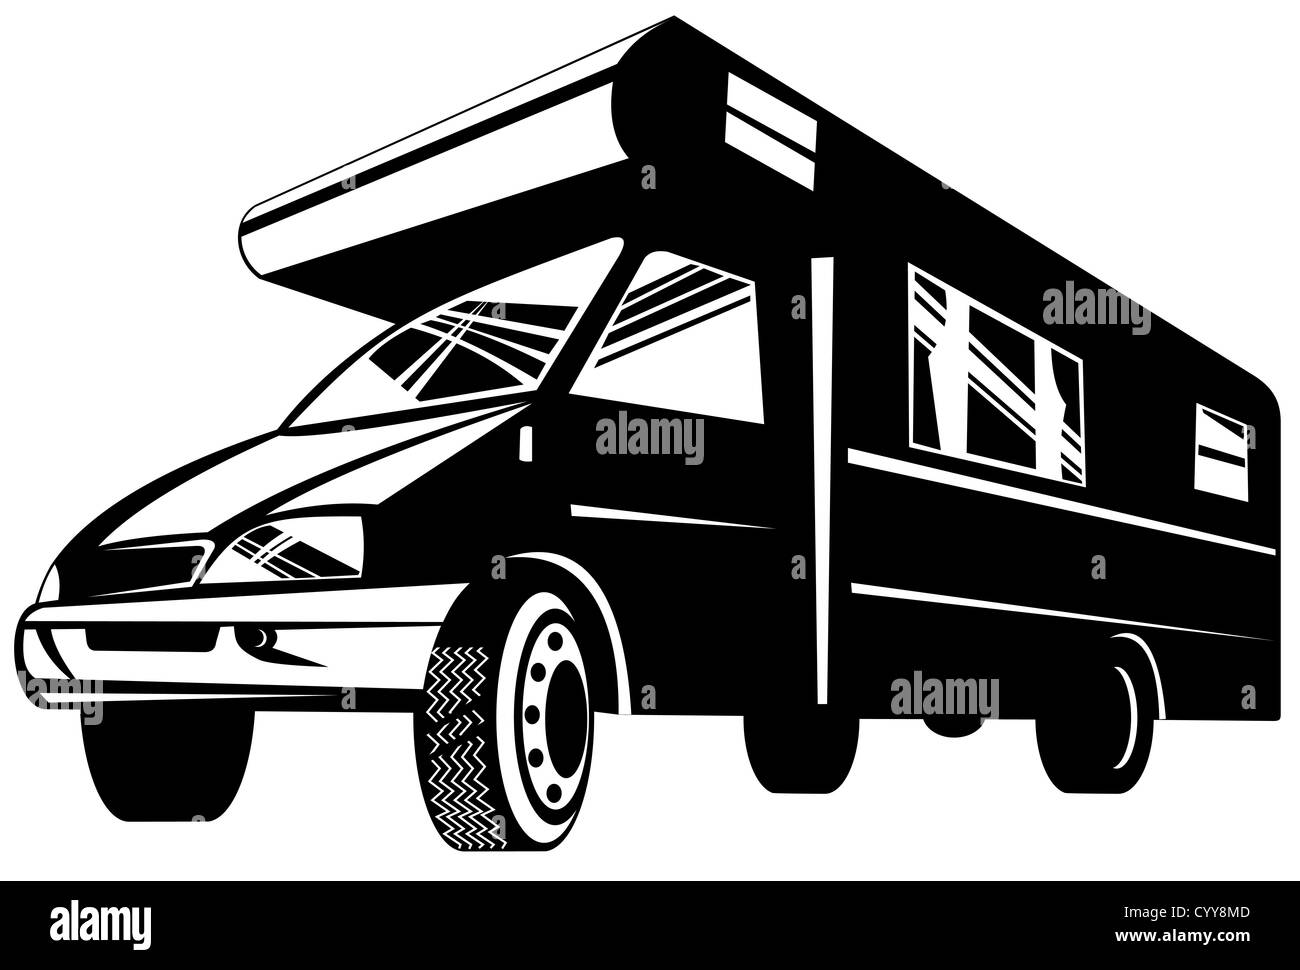 Illustration of a camper van viewed from a low angle done in retro style. Stock Photo